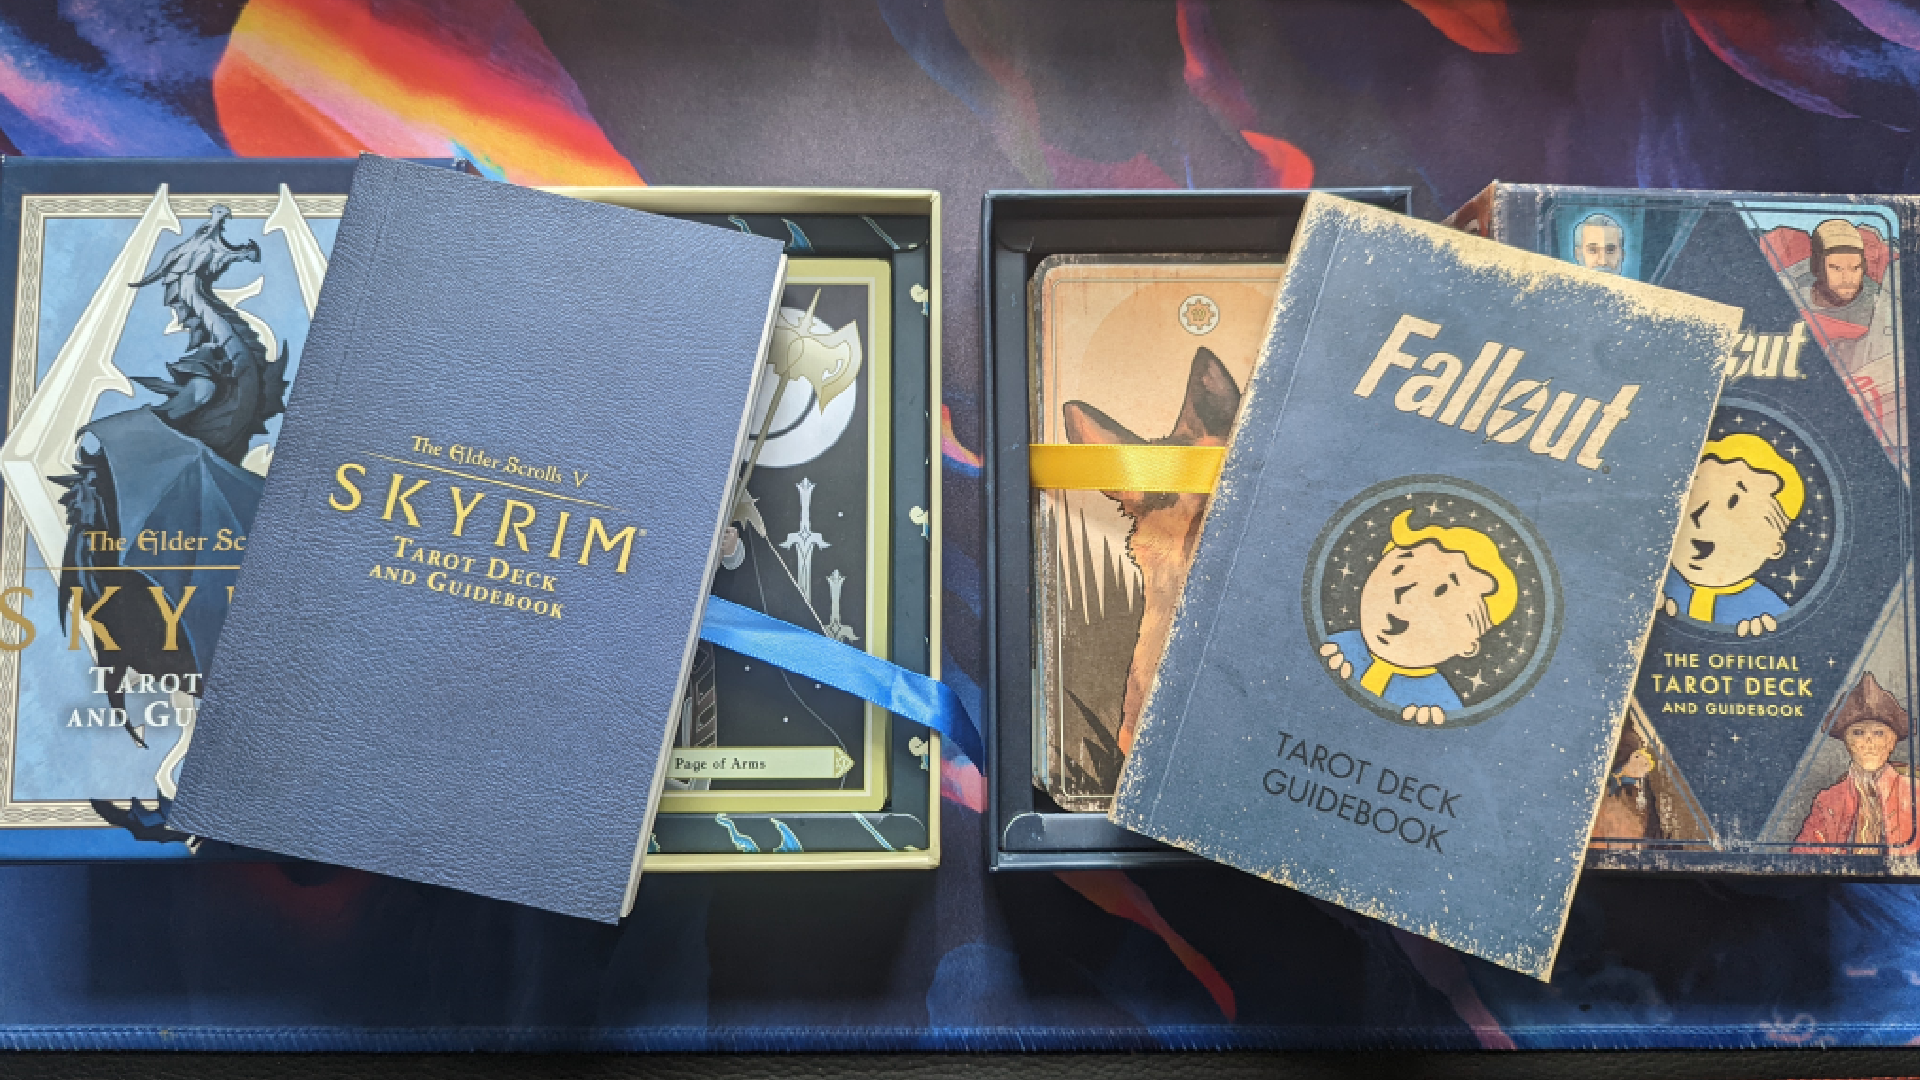 These Skyrim and Fallout tarot decks are more novelty than magic